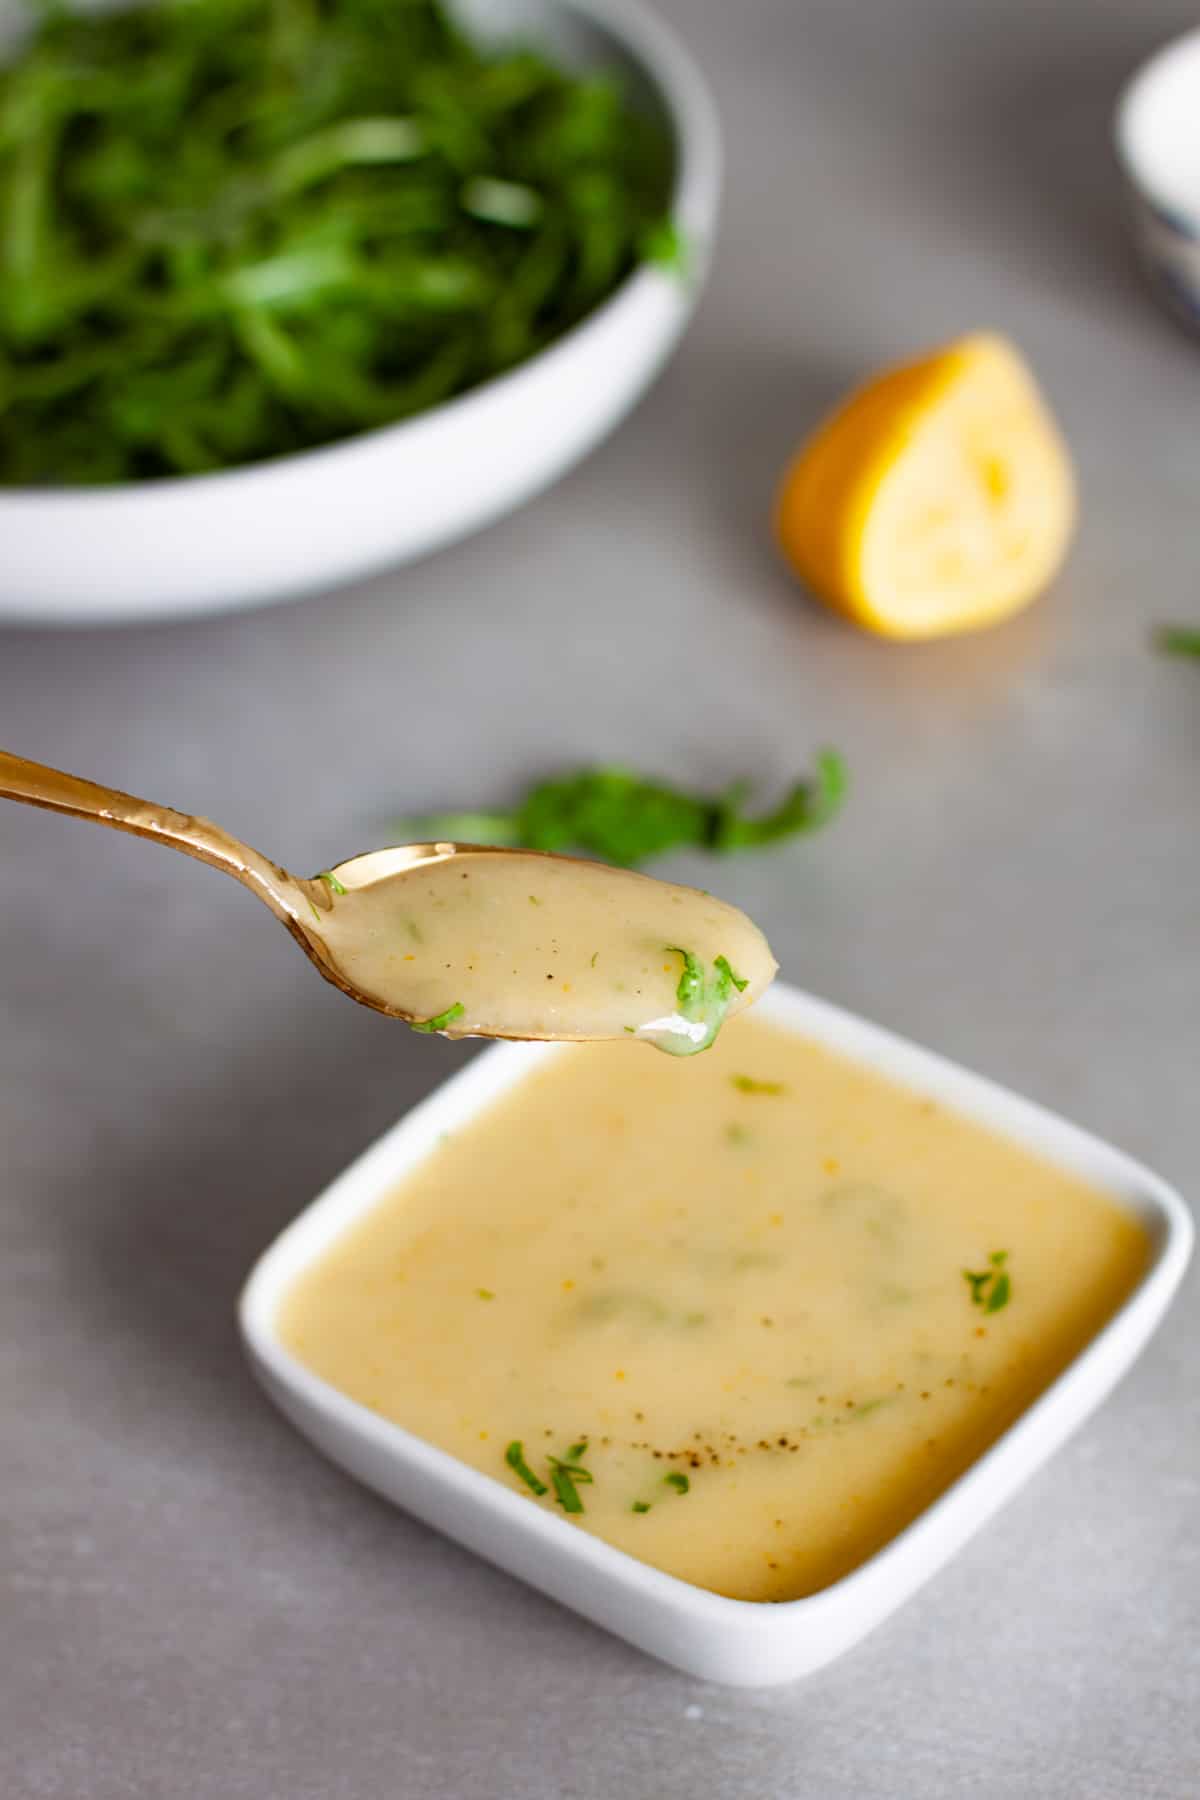 A spoonful of preserved lemon vinaigrette above a bowl of the dressing.